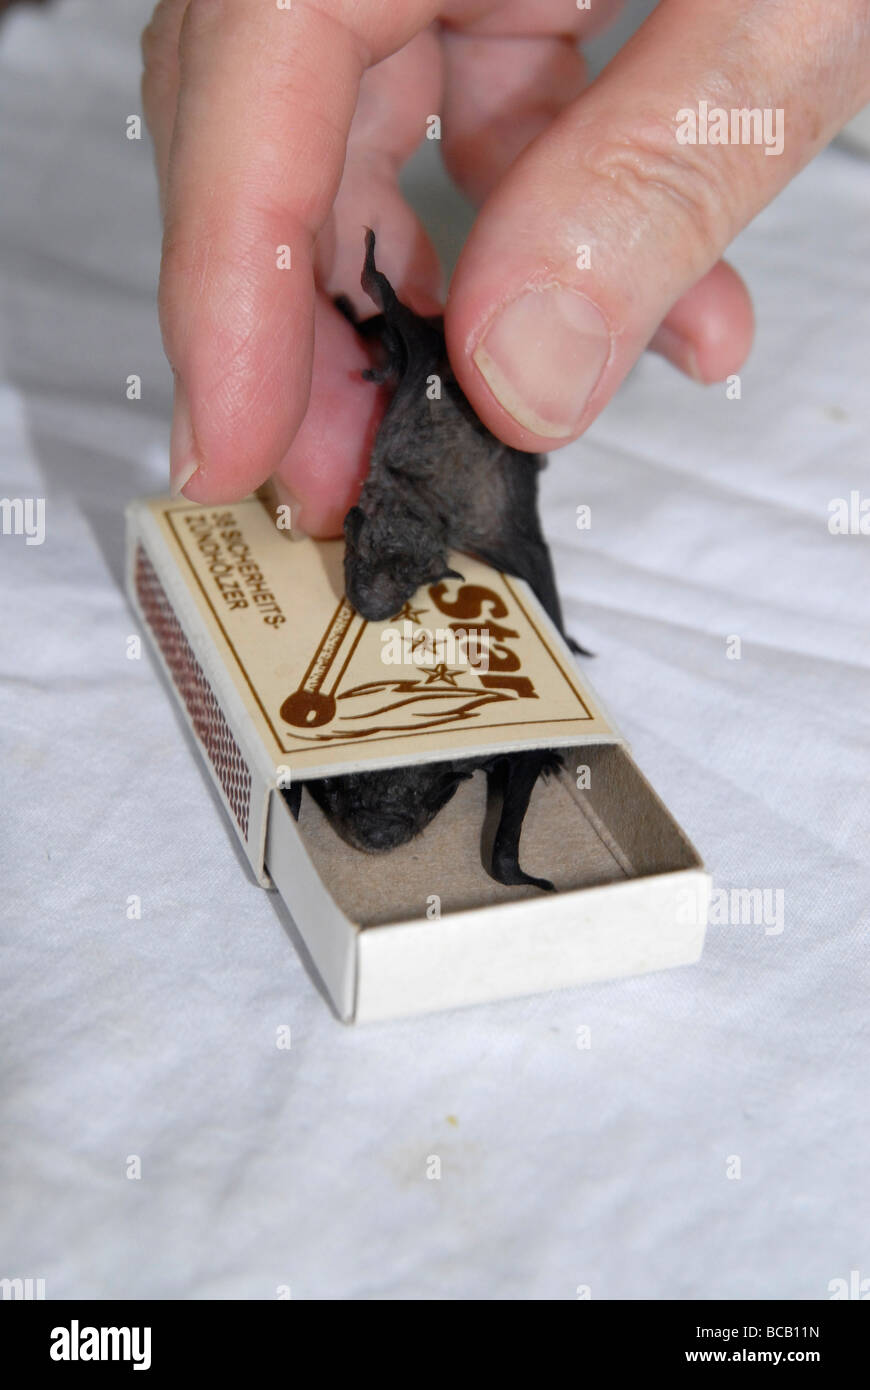 Two bats (common pipistrelle), about 3 weeks old, sitting on and inside a box of matches Stock Photo